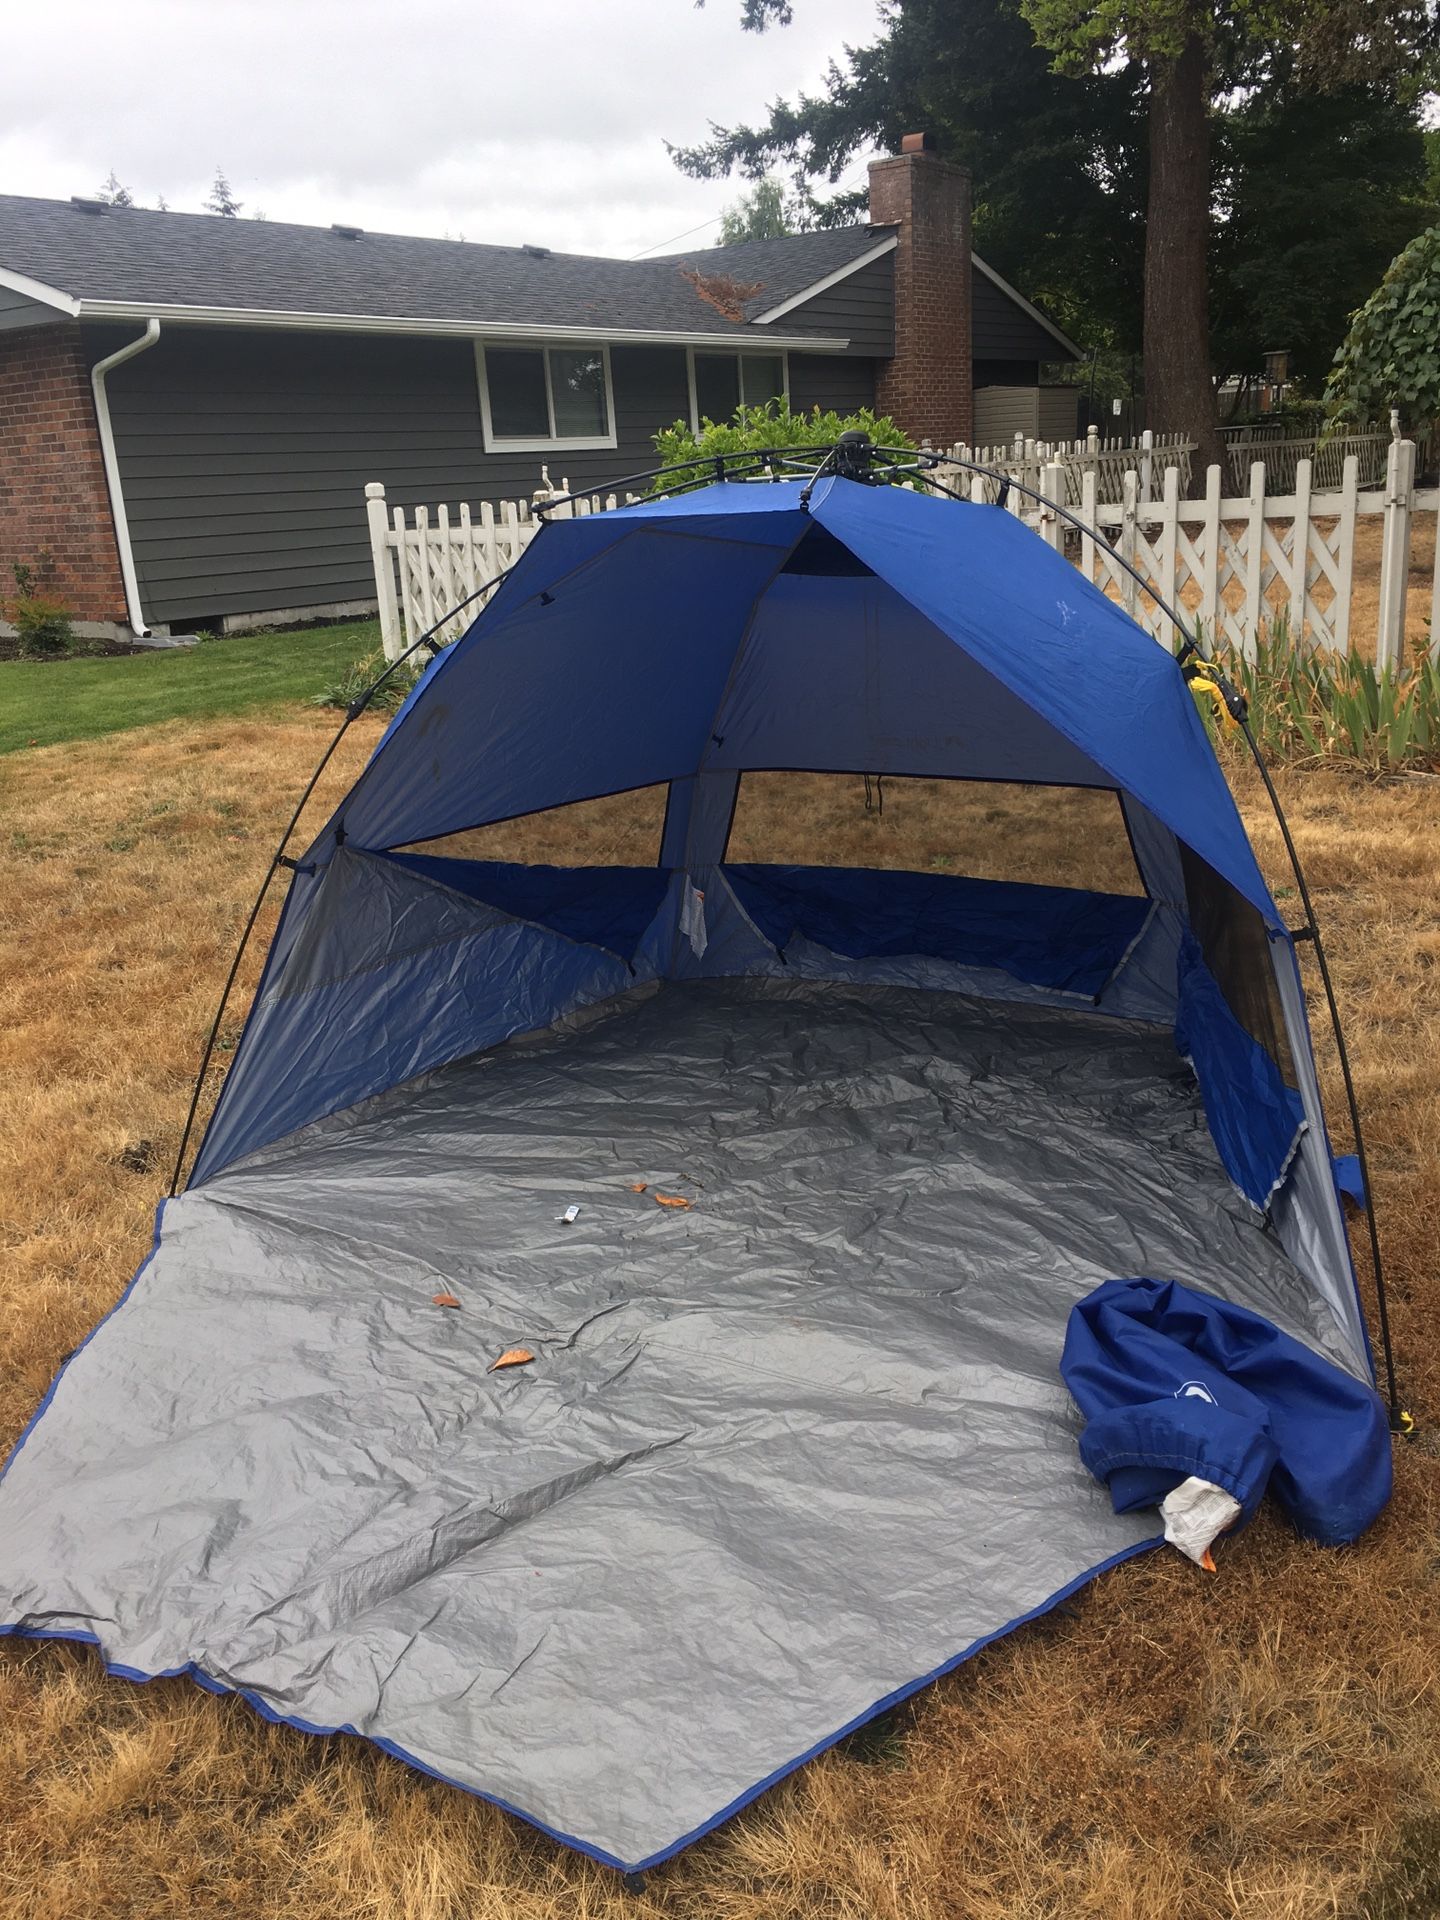 Light speed open tent. Excellent condition